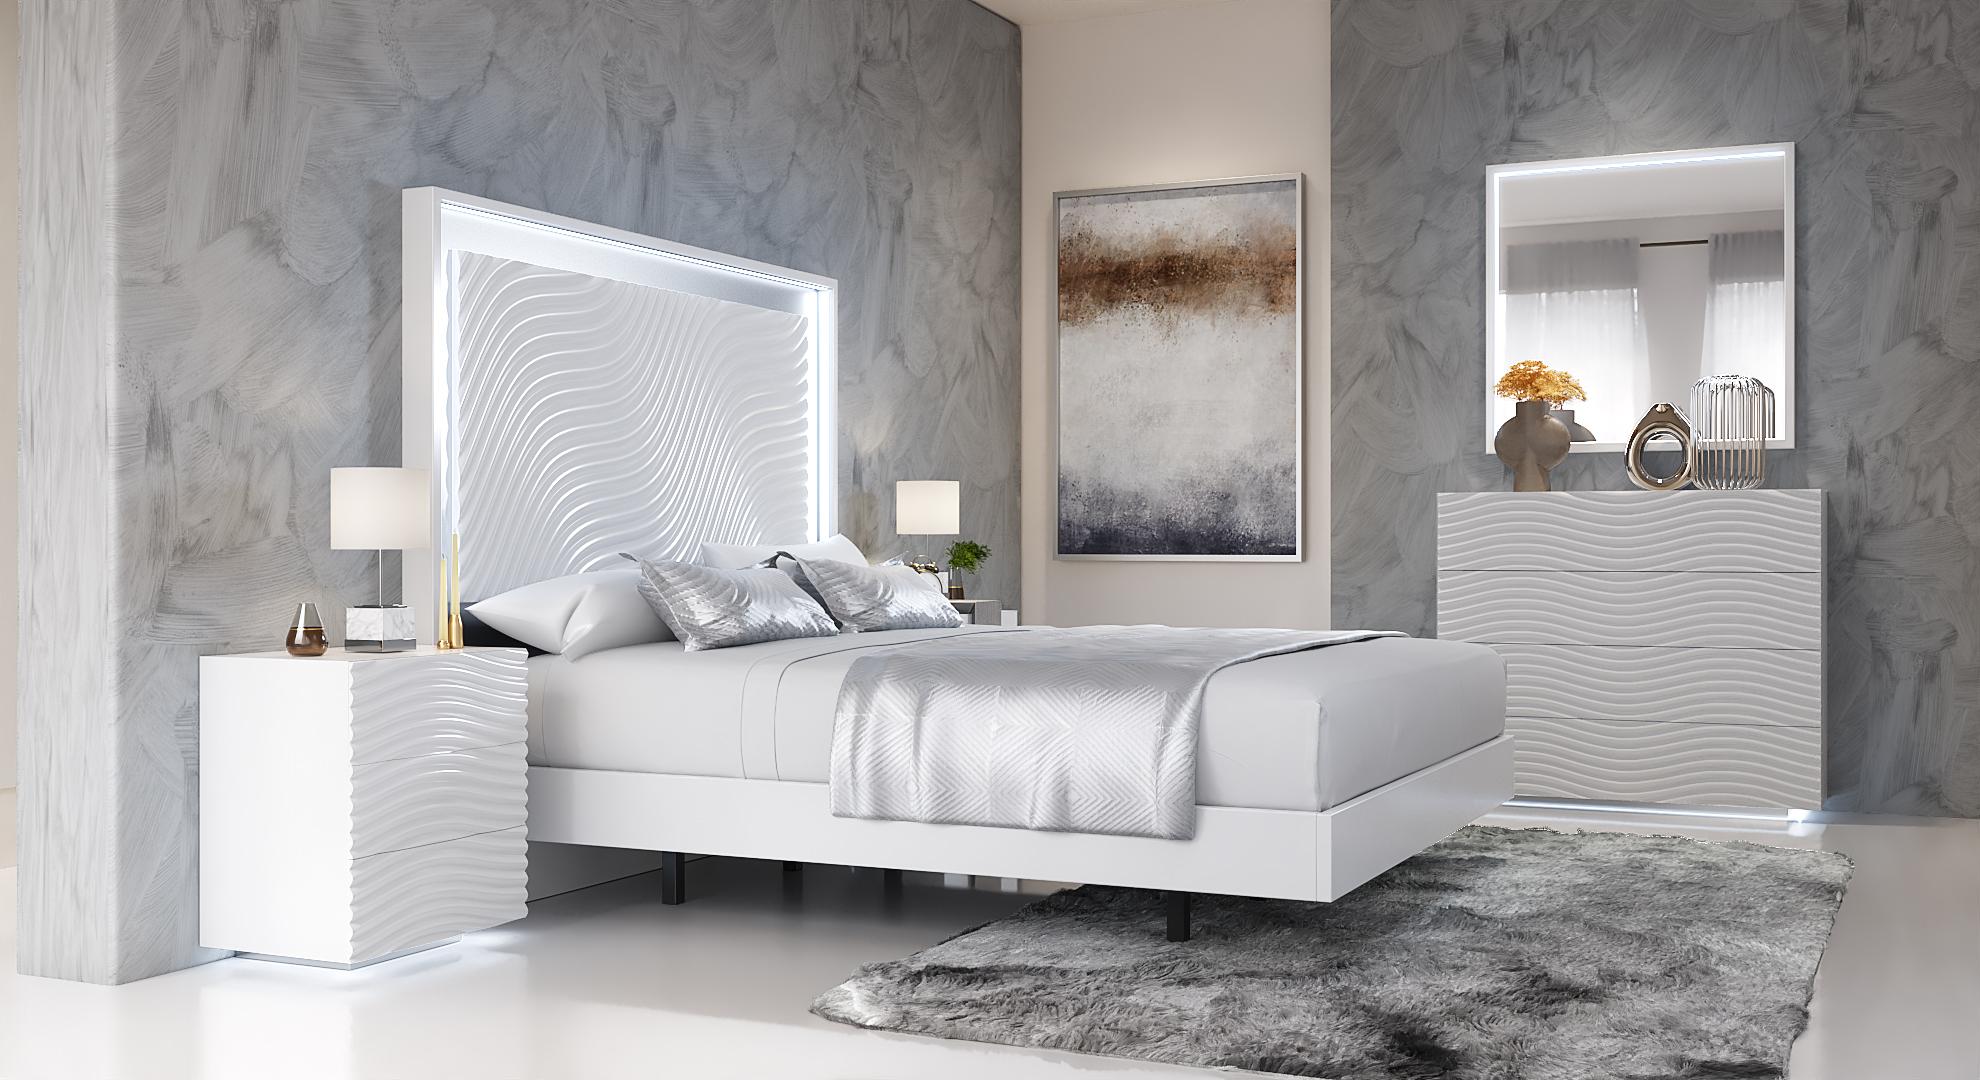 

    
Glam Shiny White Queen Bedroom Set 6 WAVE ESF Contemporary Modern MADE IN SPAIN
